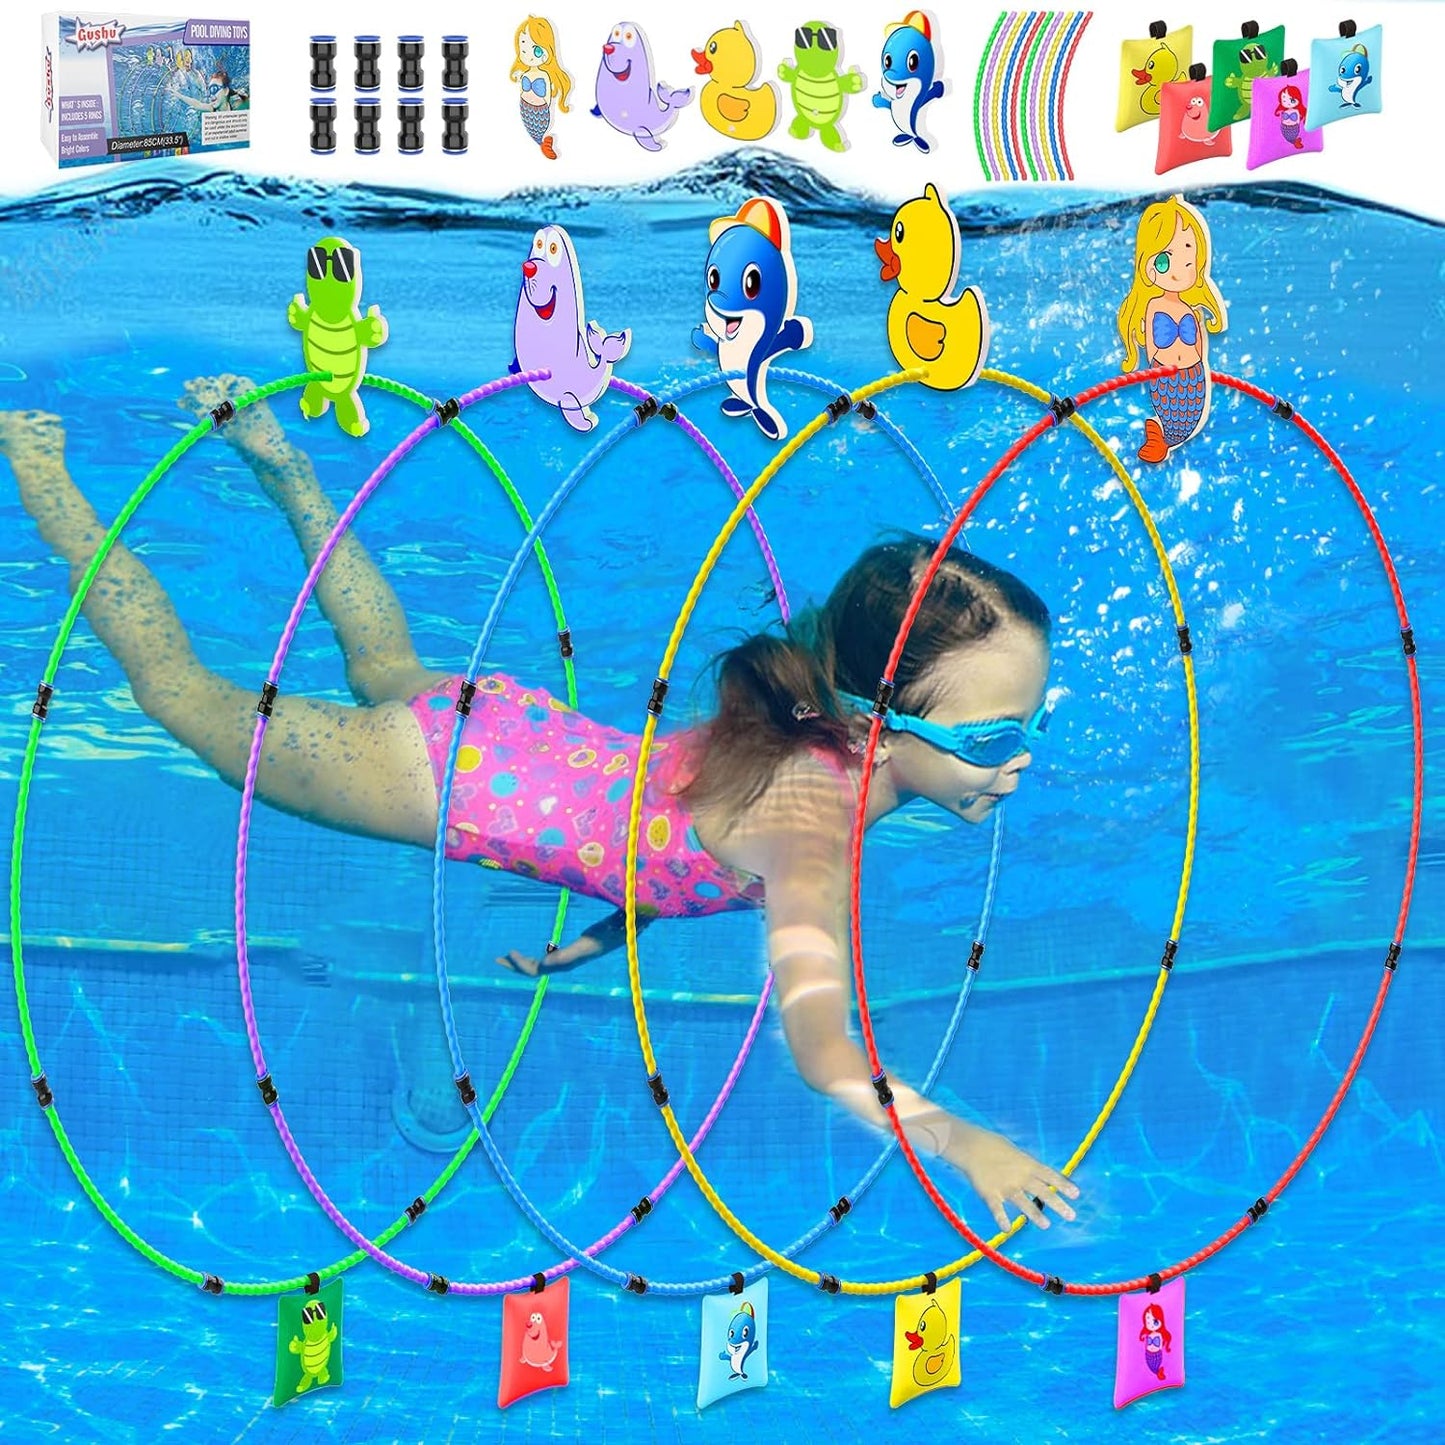 Diving Toys 15 PCS Pool Toys for Kids Age 4-8 8-12 Water Swim Thru Rings with Buoys and Sandbags Underwater Training Program Swimming Pool Games Water Sports Gifts